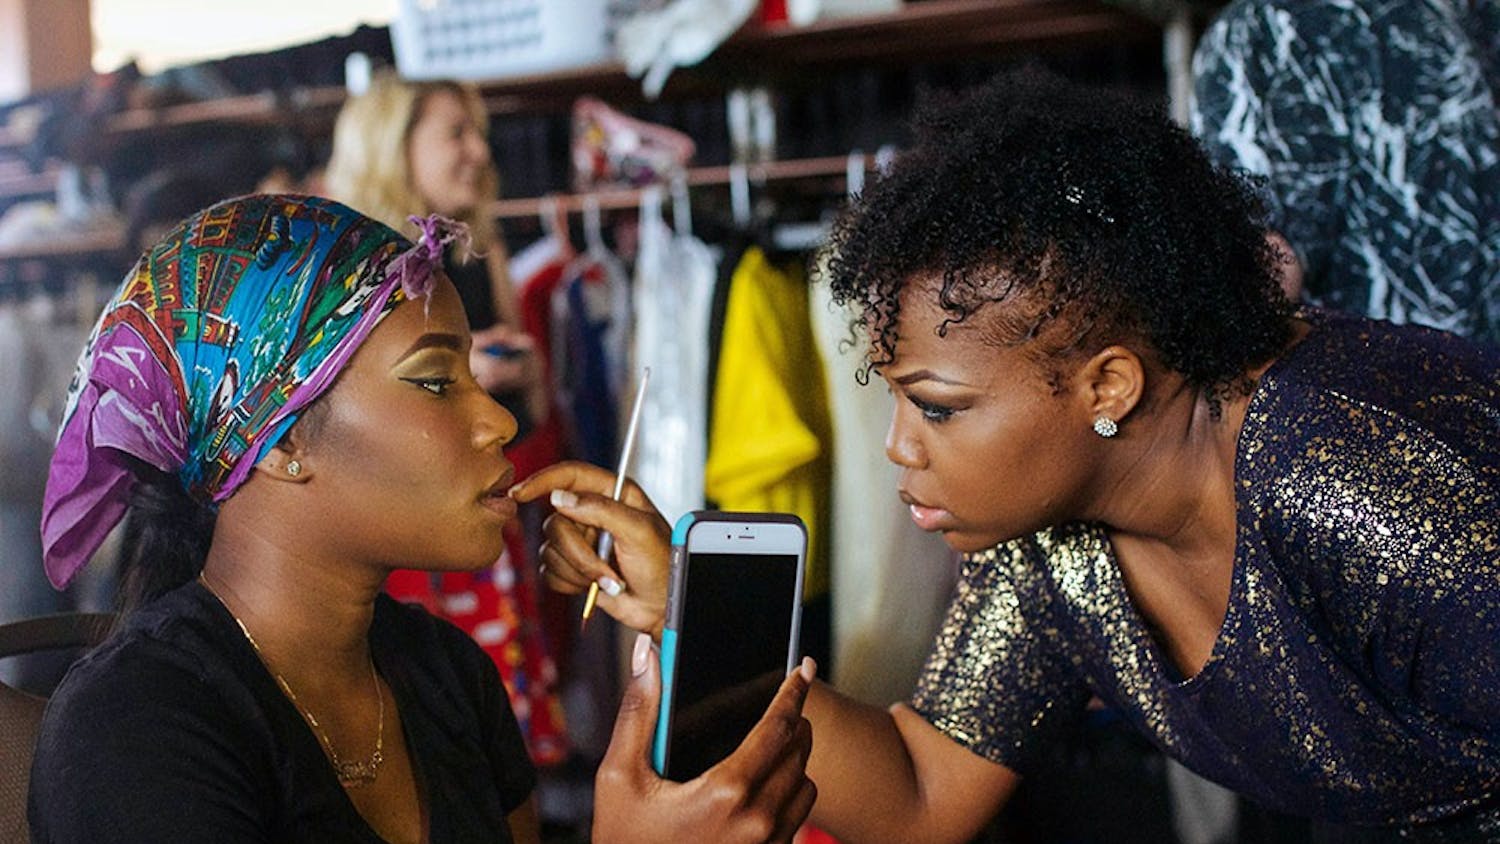 Cierra McNeal does some last minute touch ups on her model Teraira Charlton before sending her out to walk in the Indiana University Fashion Show at the Indiana Memorial Union Alumni Hall. The fashion show was produced by Retail Studies Organization and showcased the designs of IU students earning a bachelors degree in Fashion Design.